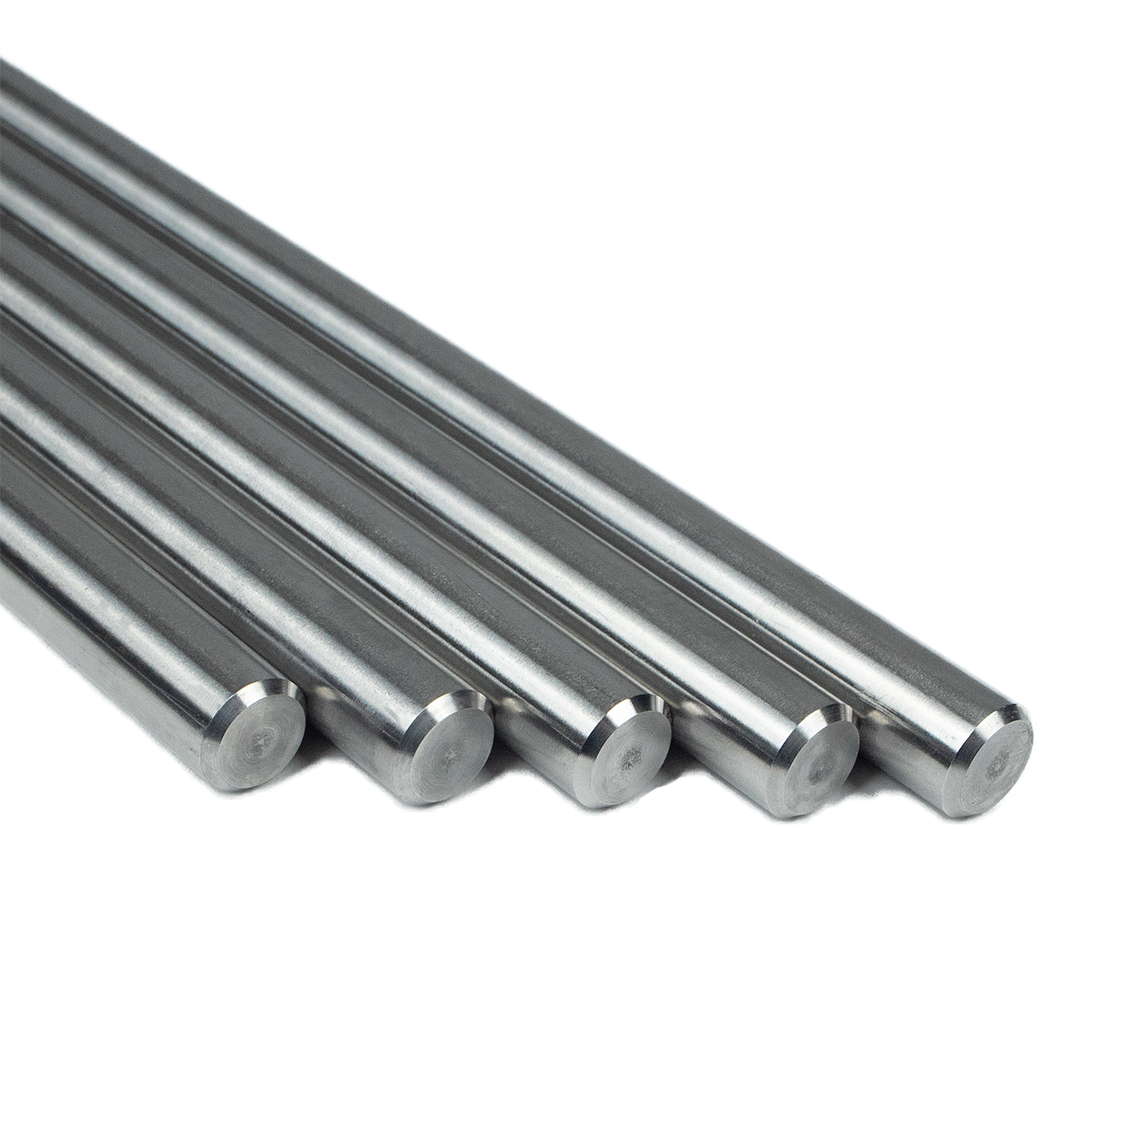 Stand Rod - Ø 12 mm, length 1250 mm - stainless steel